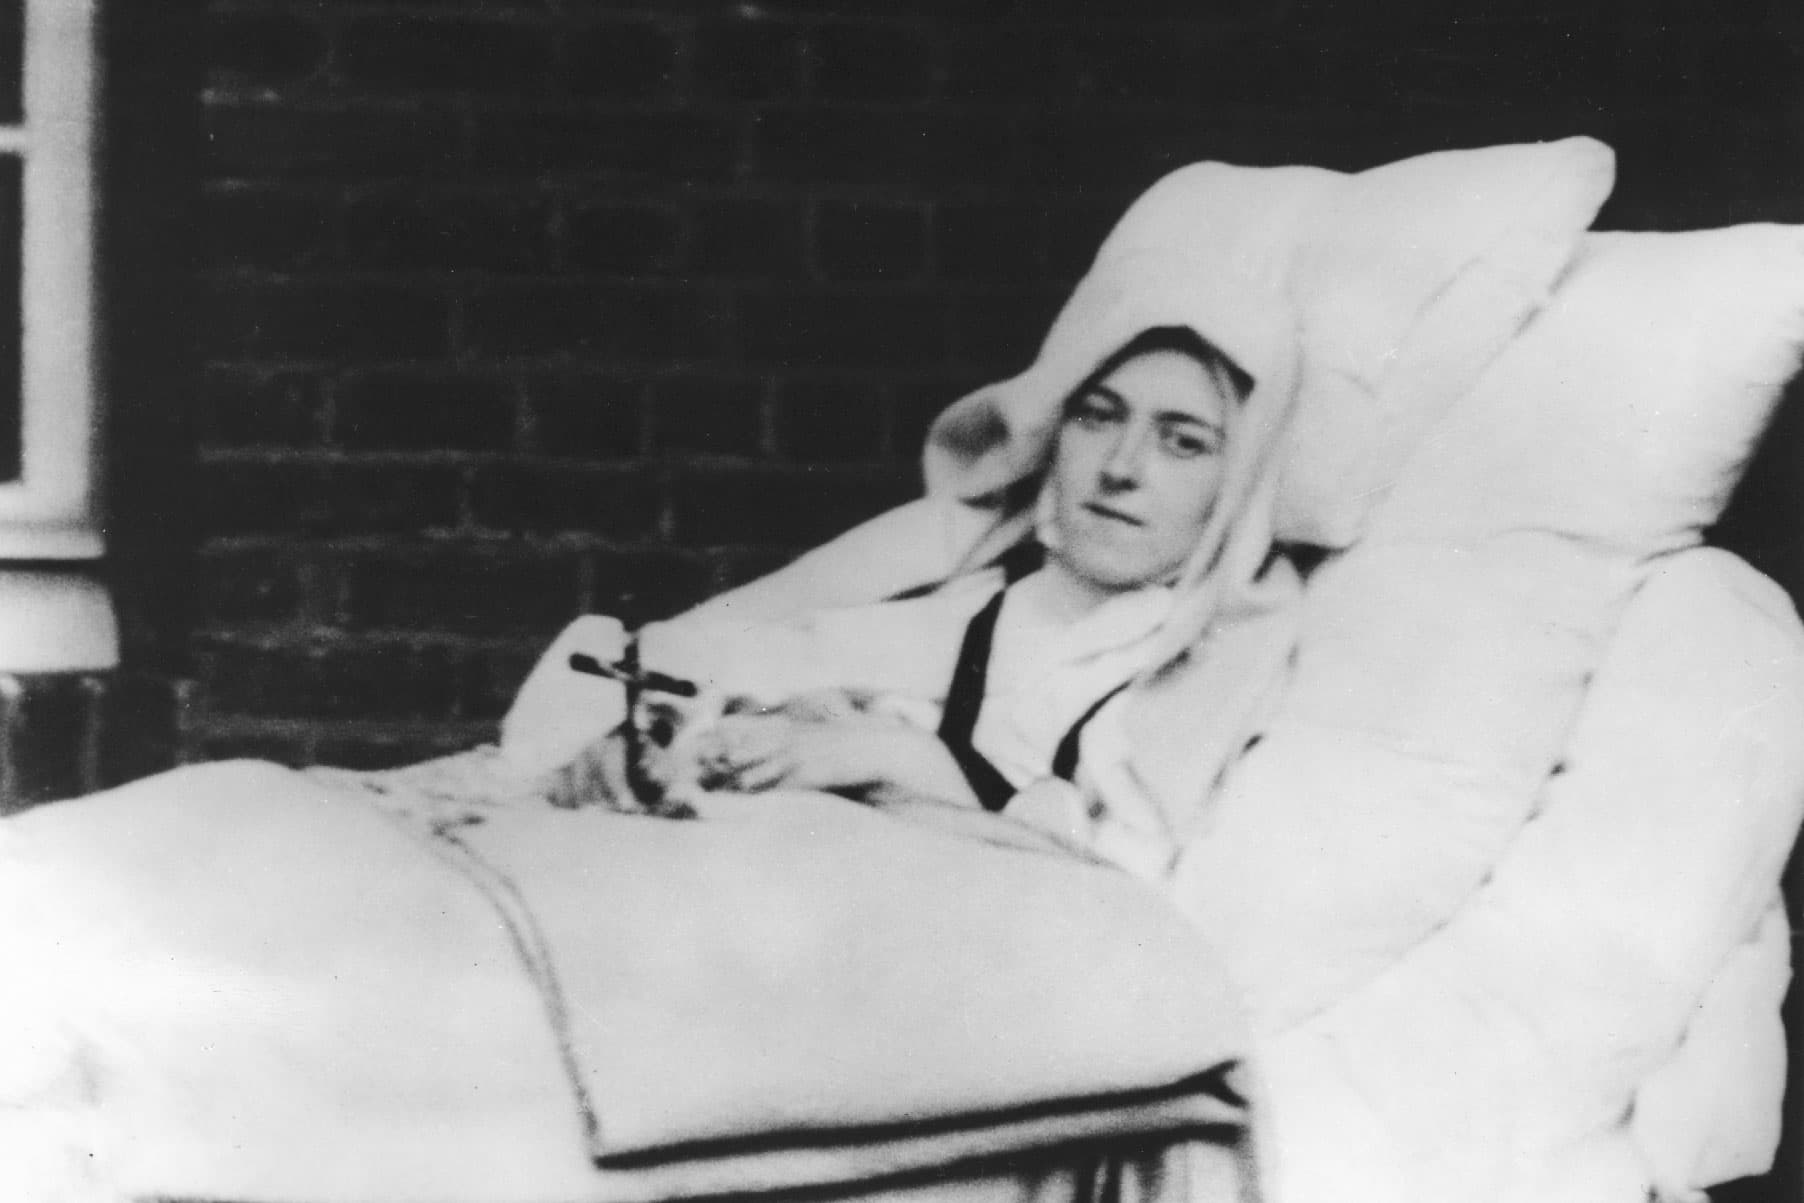 St. Therese on the outdoor porch at Carmel during her illness